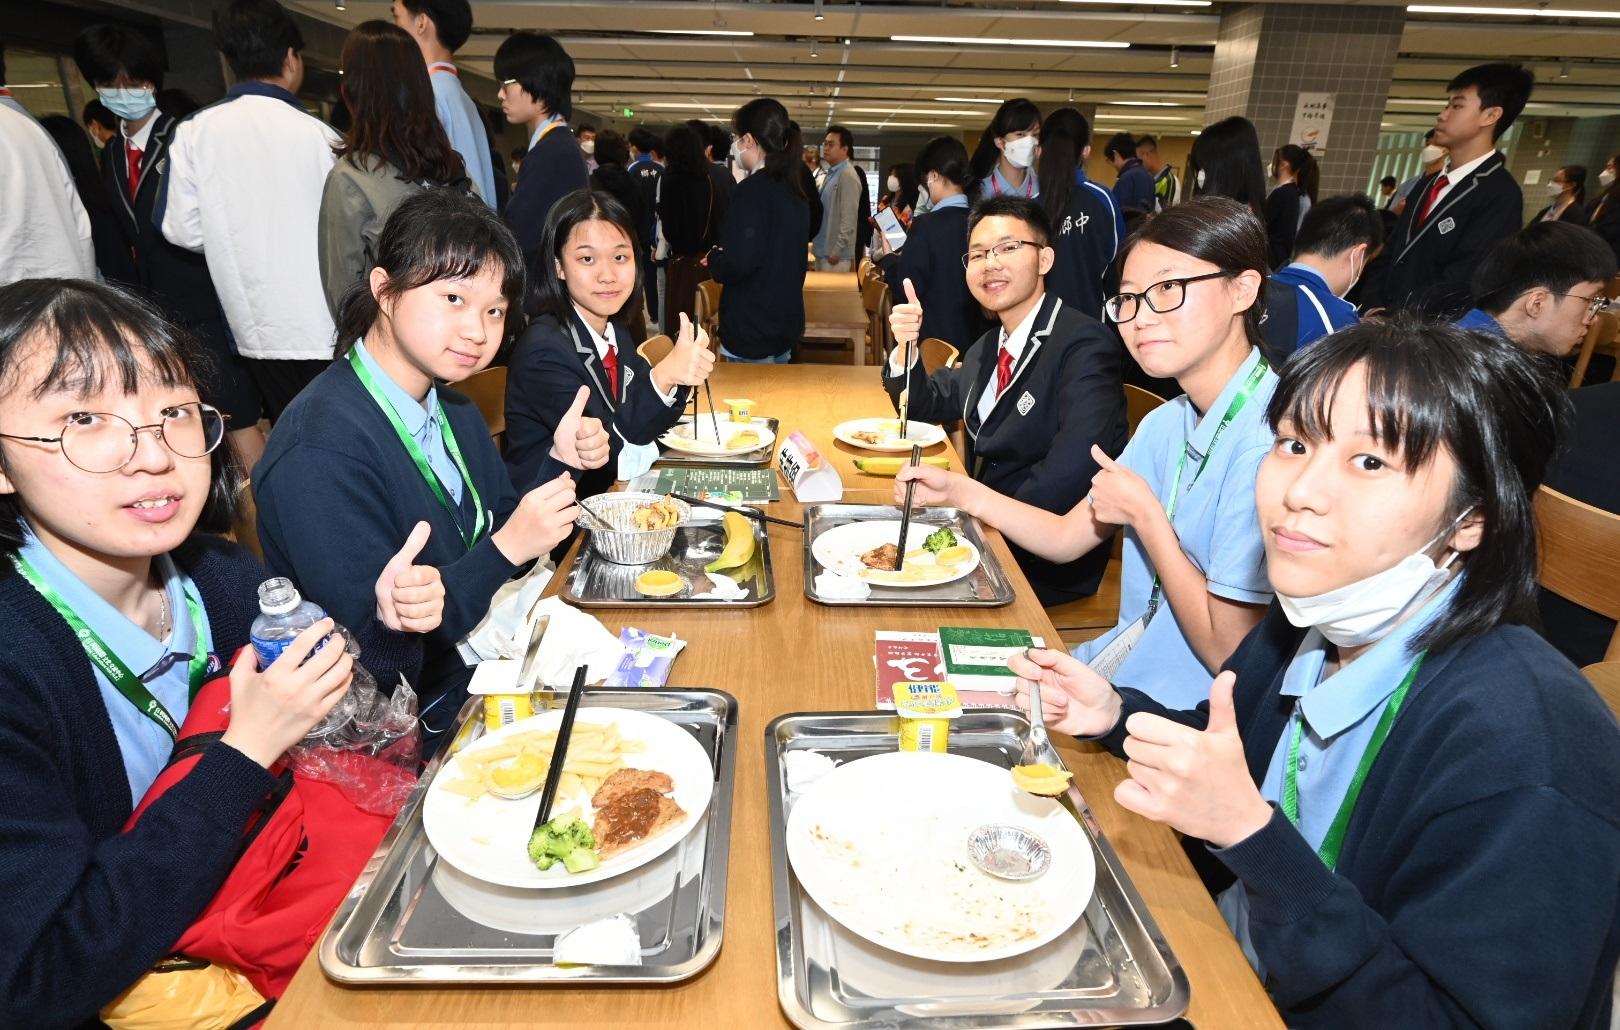 The delegation of the first Mainland study tour for students of the senior secondary subject of Citizenship and Social Development visited Guangzhou ZhiXin High School today (April 3). Photo shows members of the delegation lunching with students of ZhiXin High School.